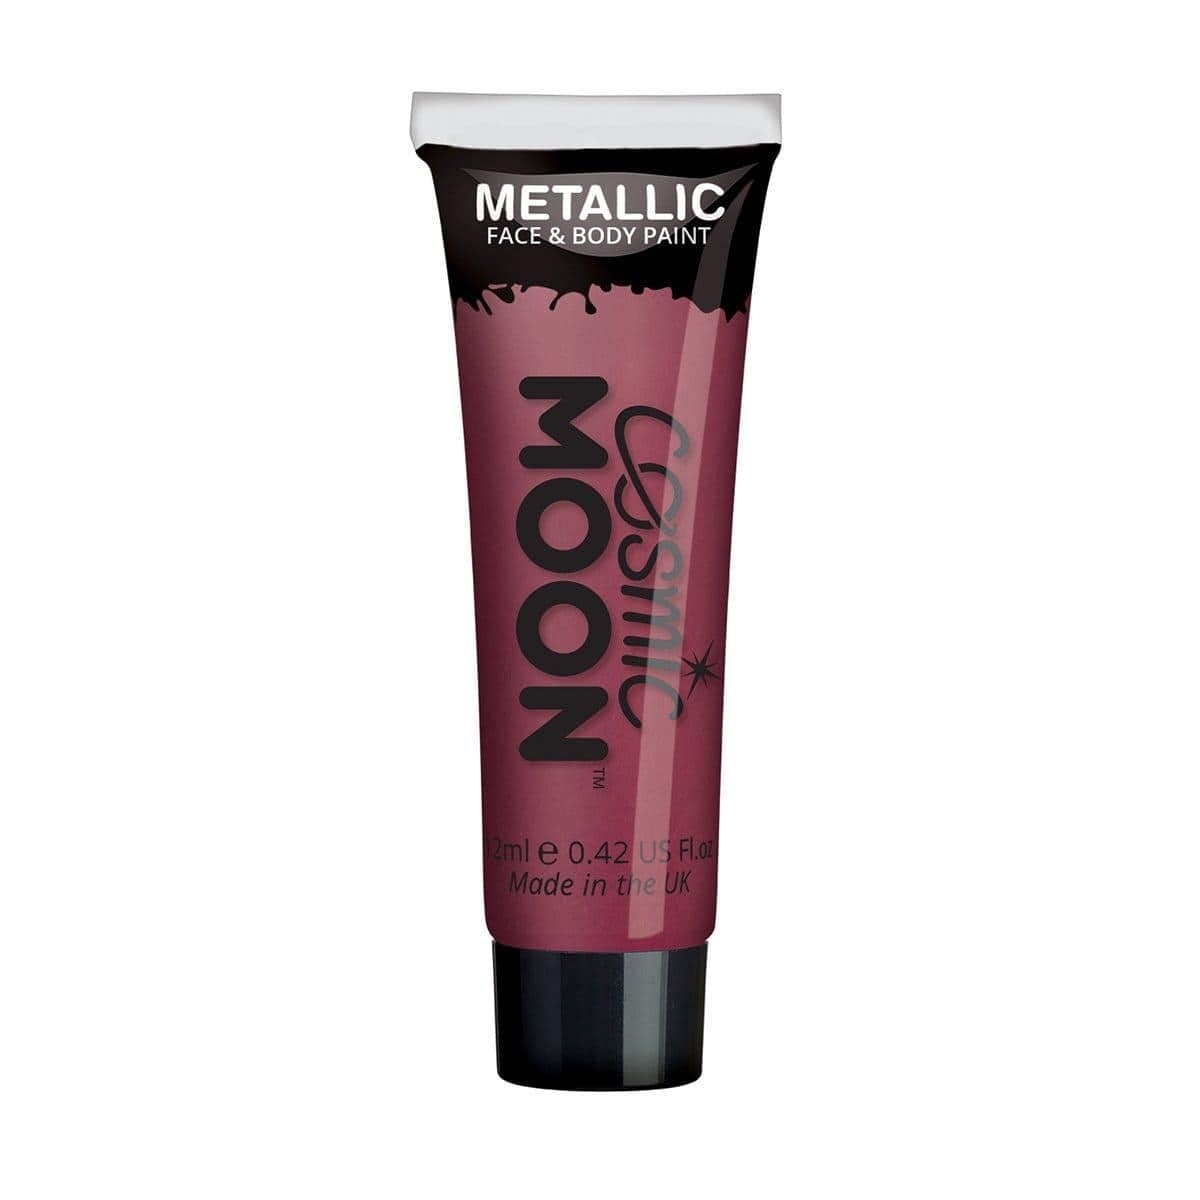 Buy Costume Accessories Moon red metallic face & body paint sold at Party Expert